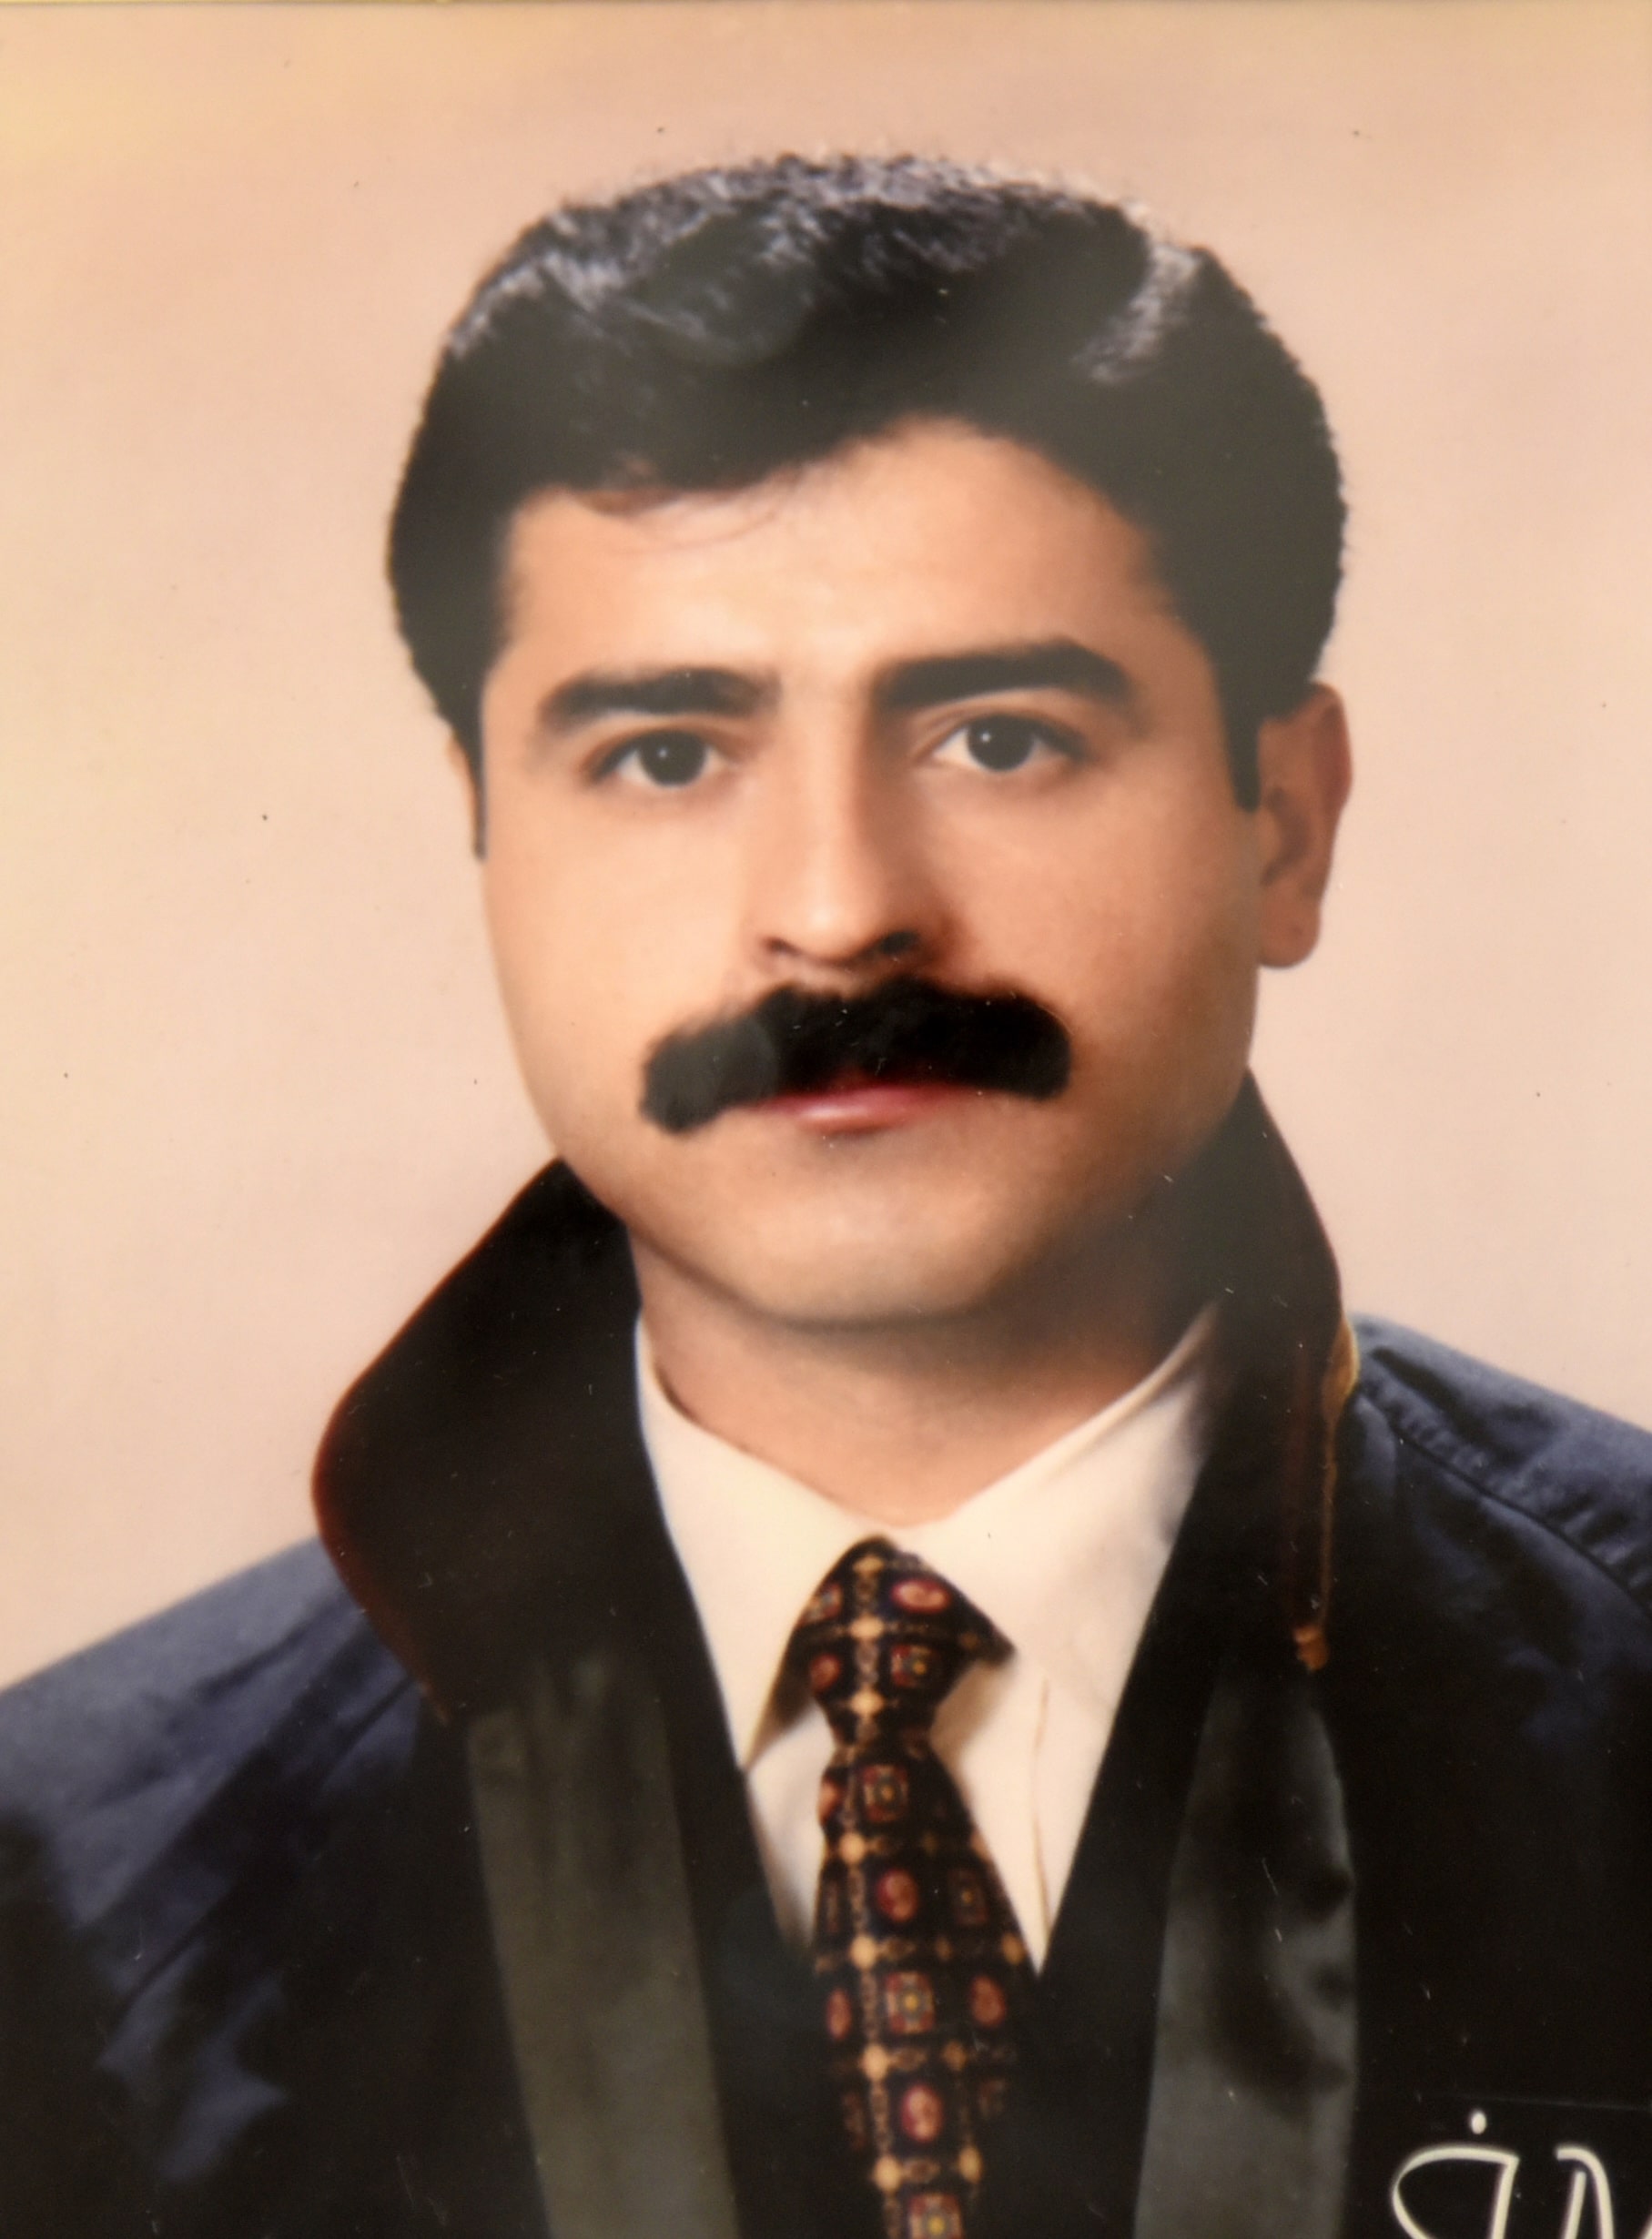 Seriously! 49+  Facts About Selahattin Demirtaş? Born 10 april 1973) is a kurdish politician and author, member of the parliament of turkey since 2007.